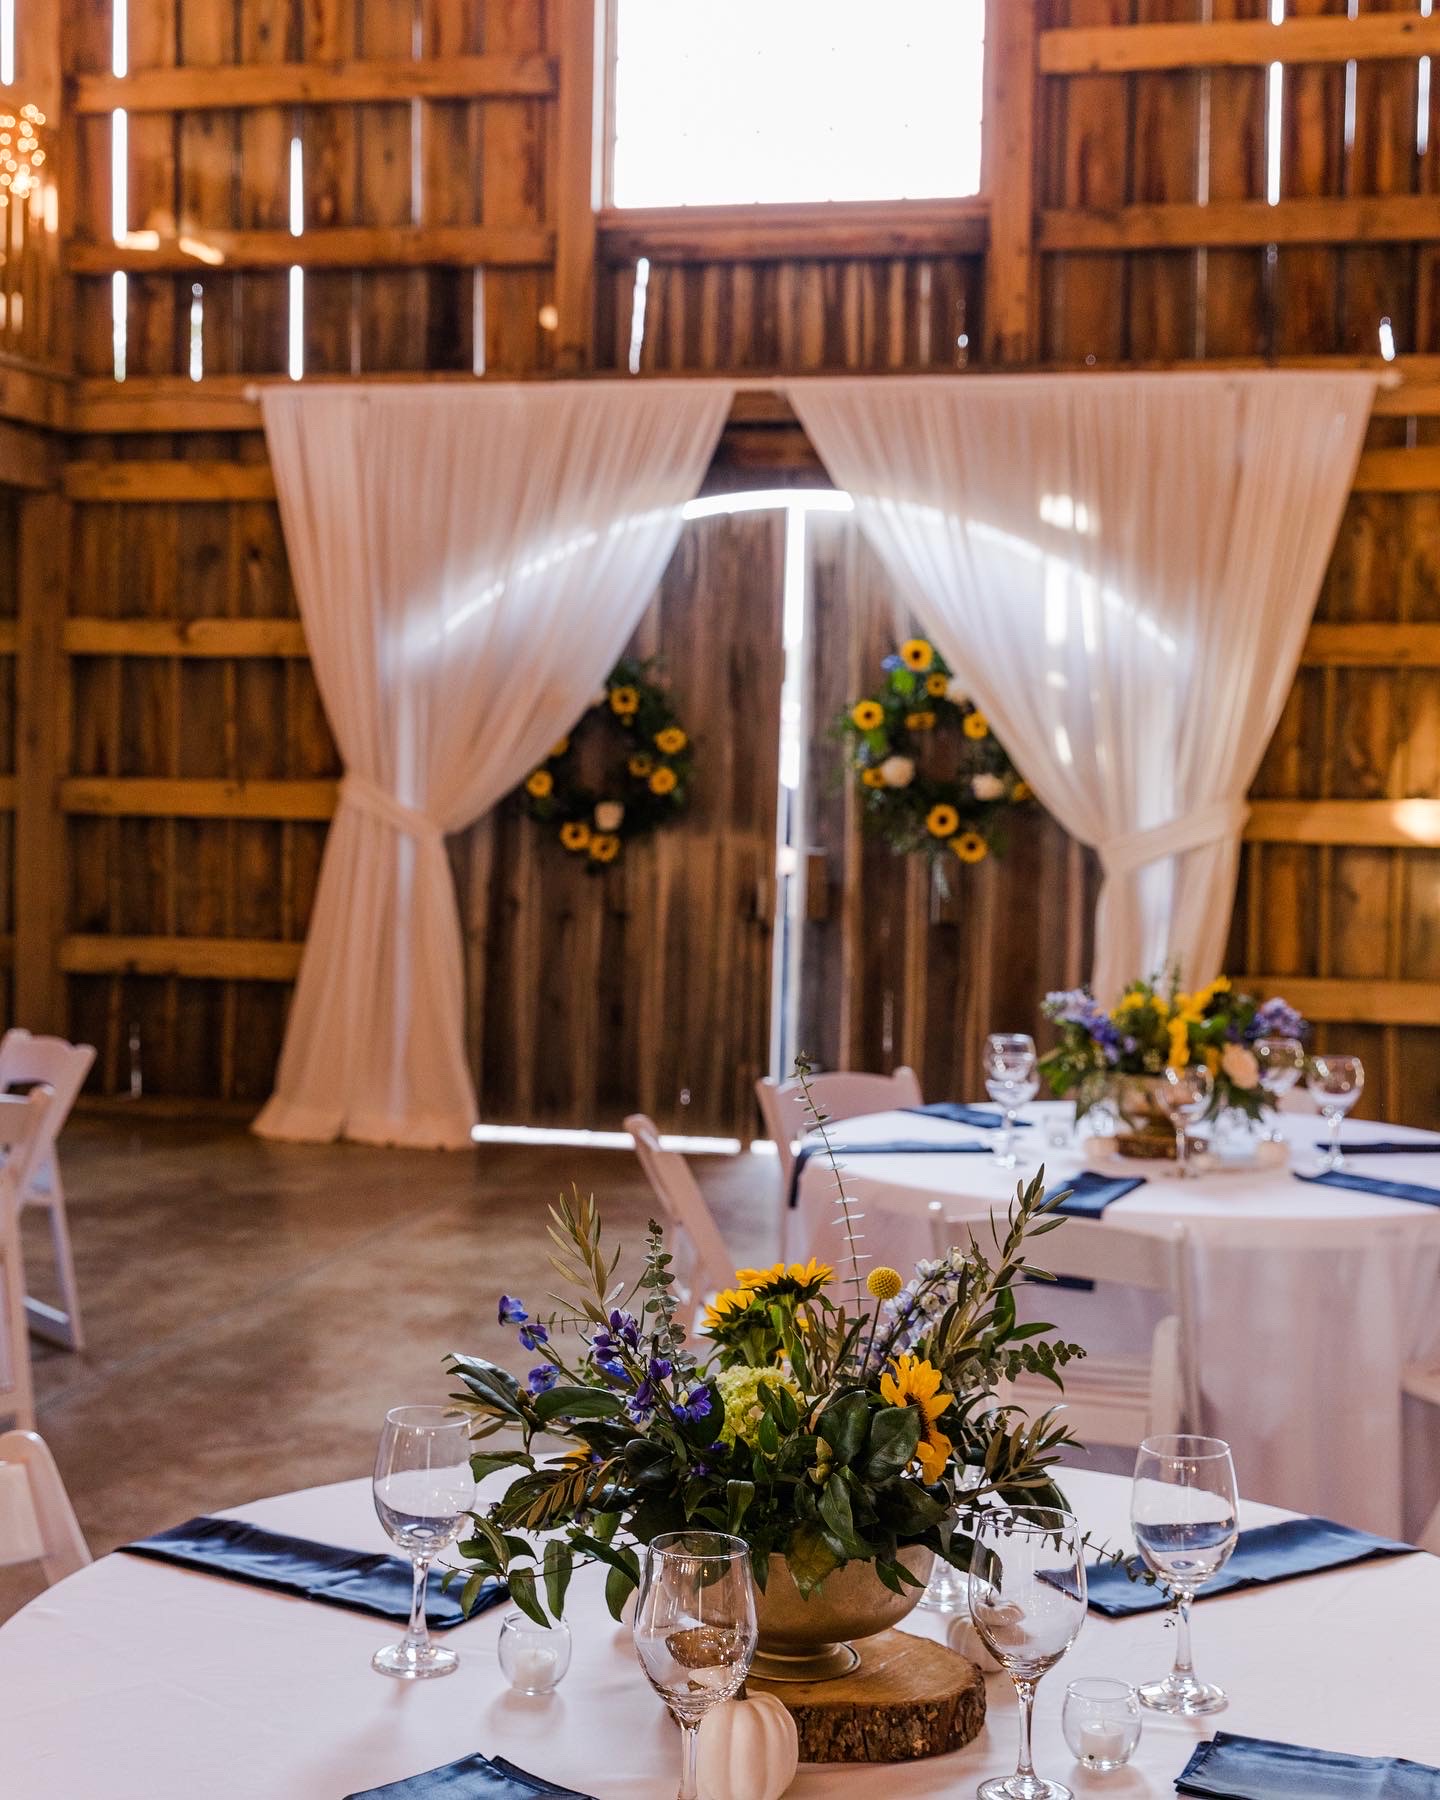 wedding barn view of the doors with beautiful light coming through